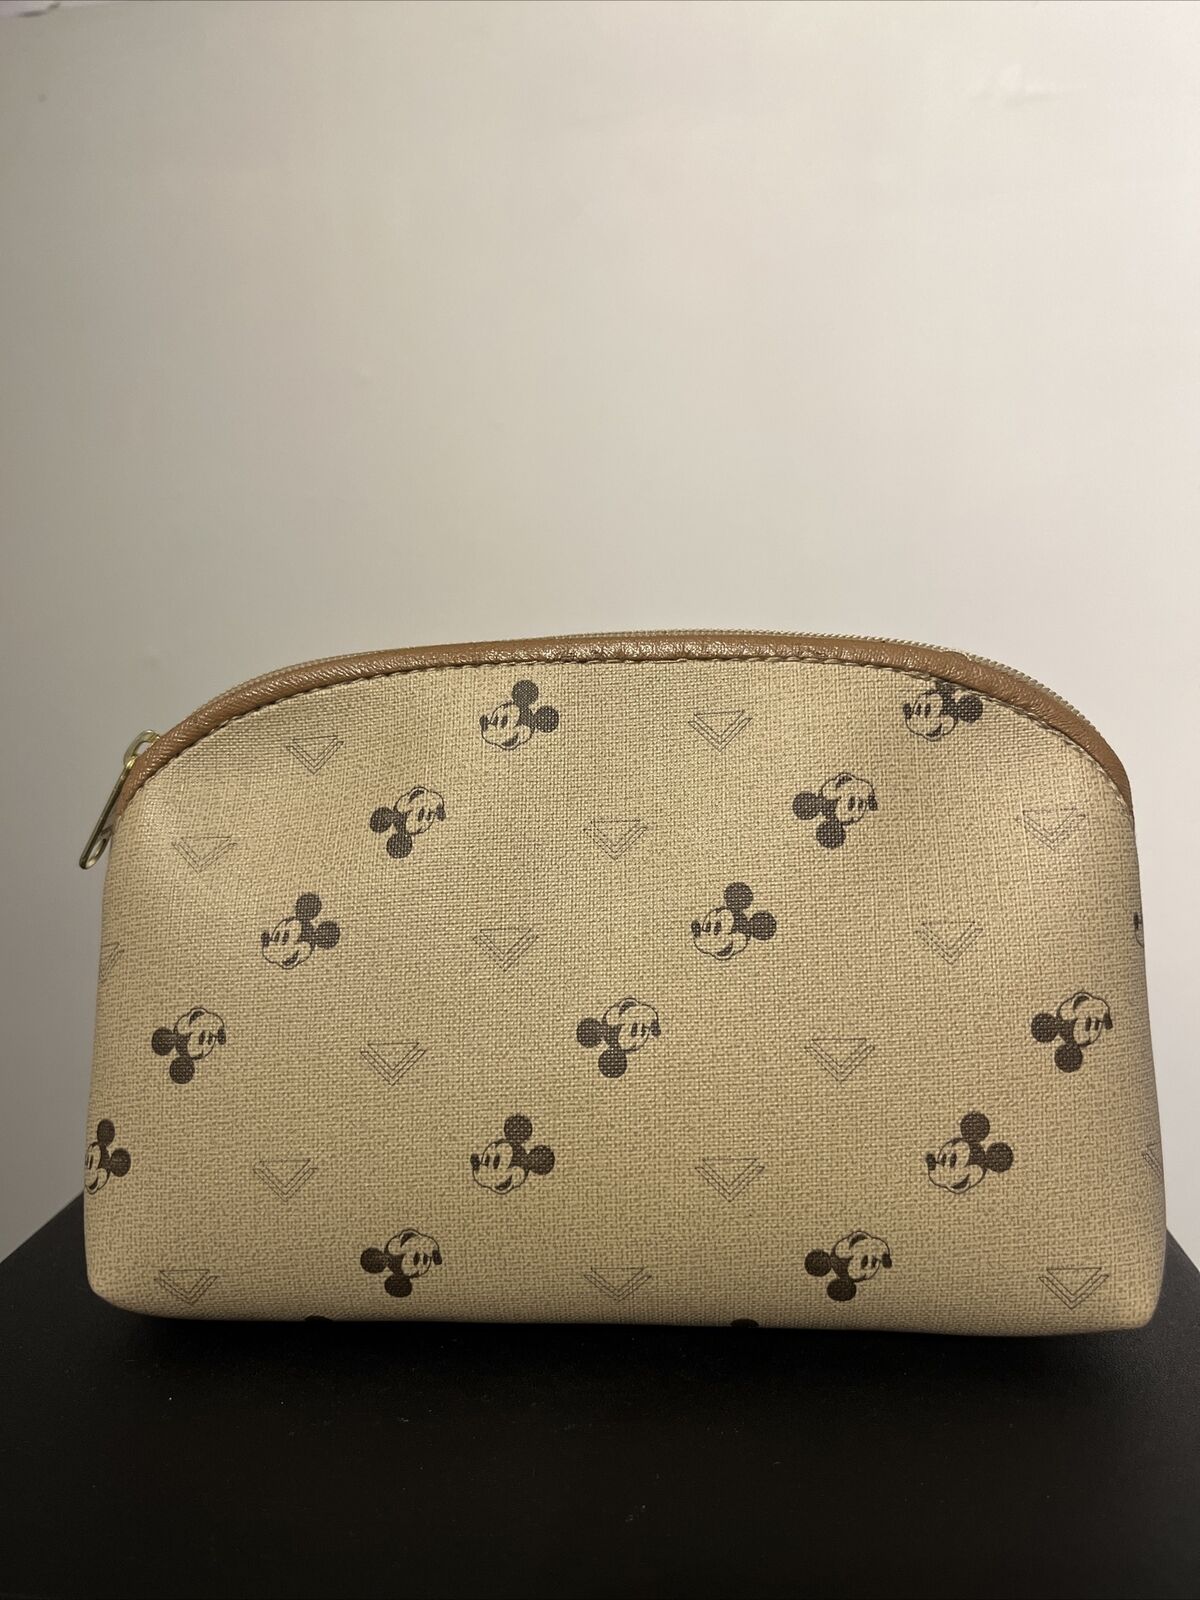 Vintage Micky Mouse Cosmetic Bag